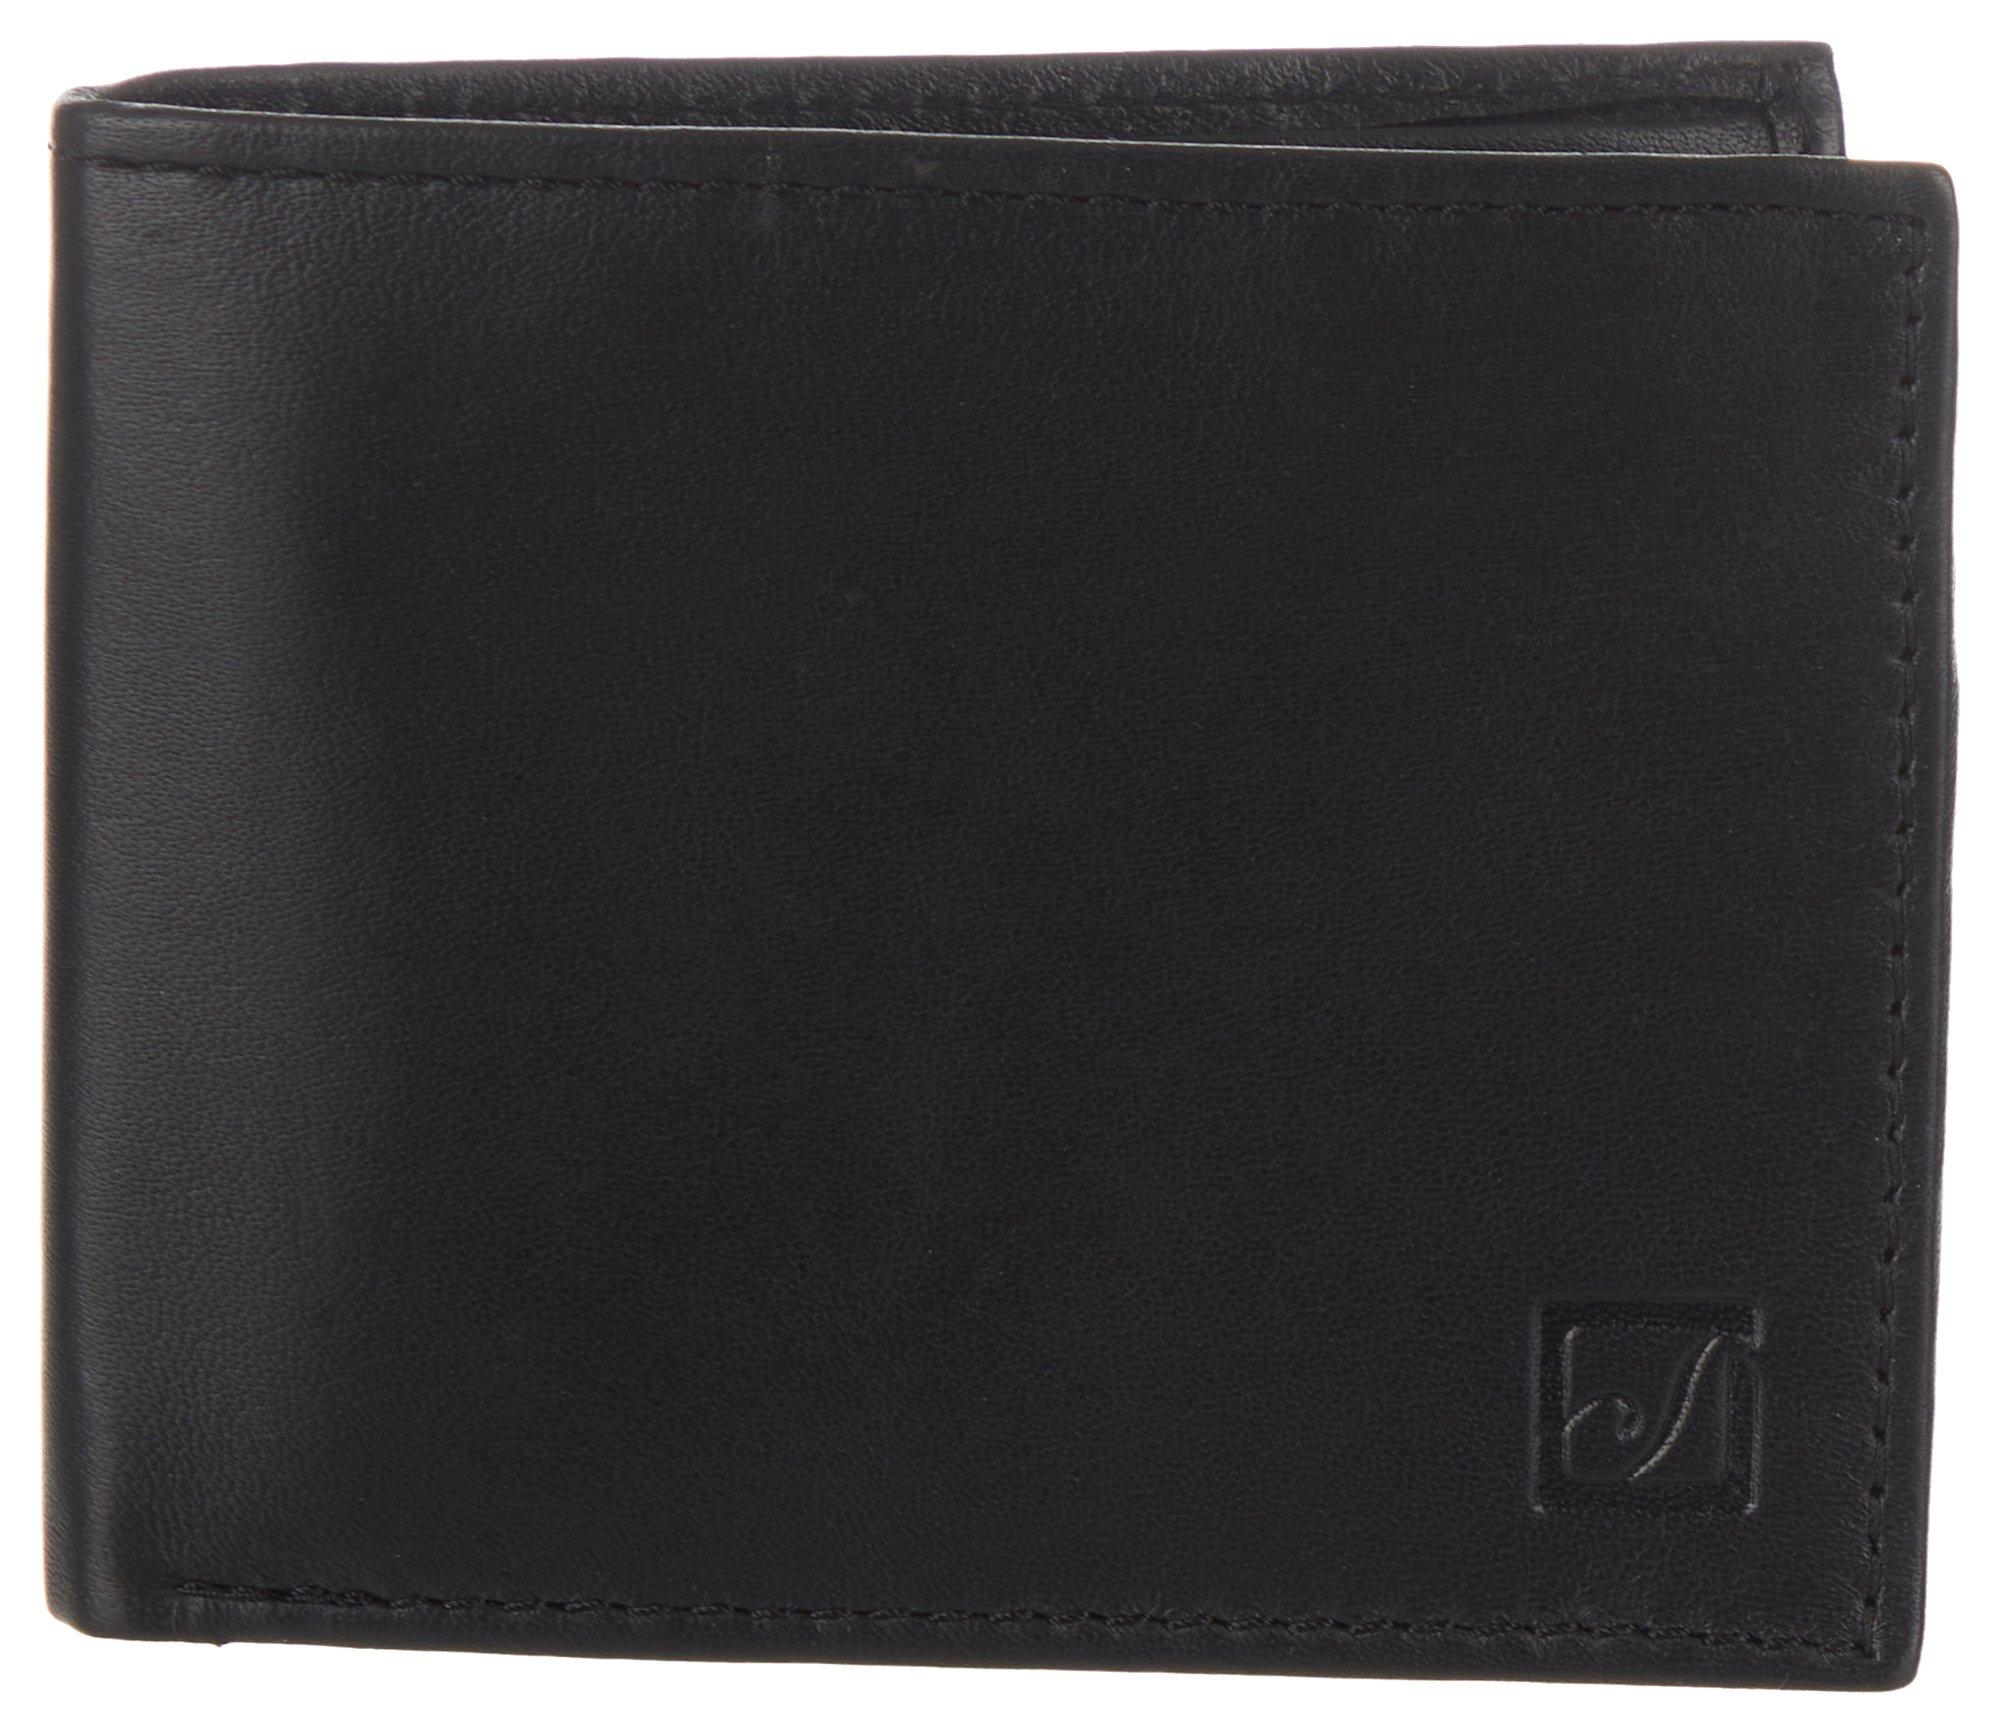 Mens RFID Genuine Leather Passcase Wallet